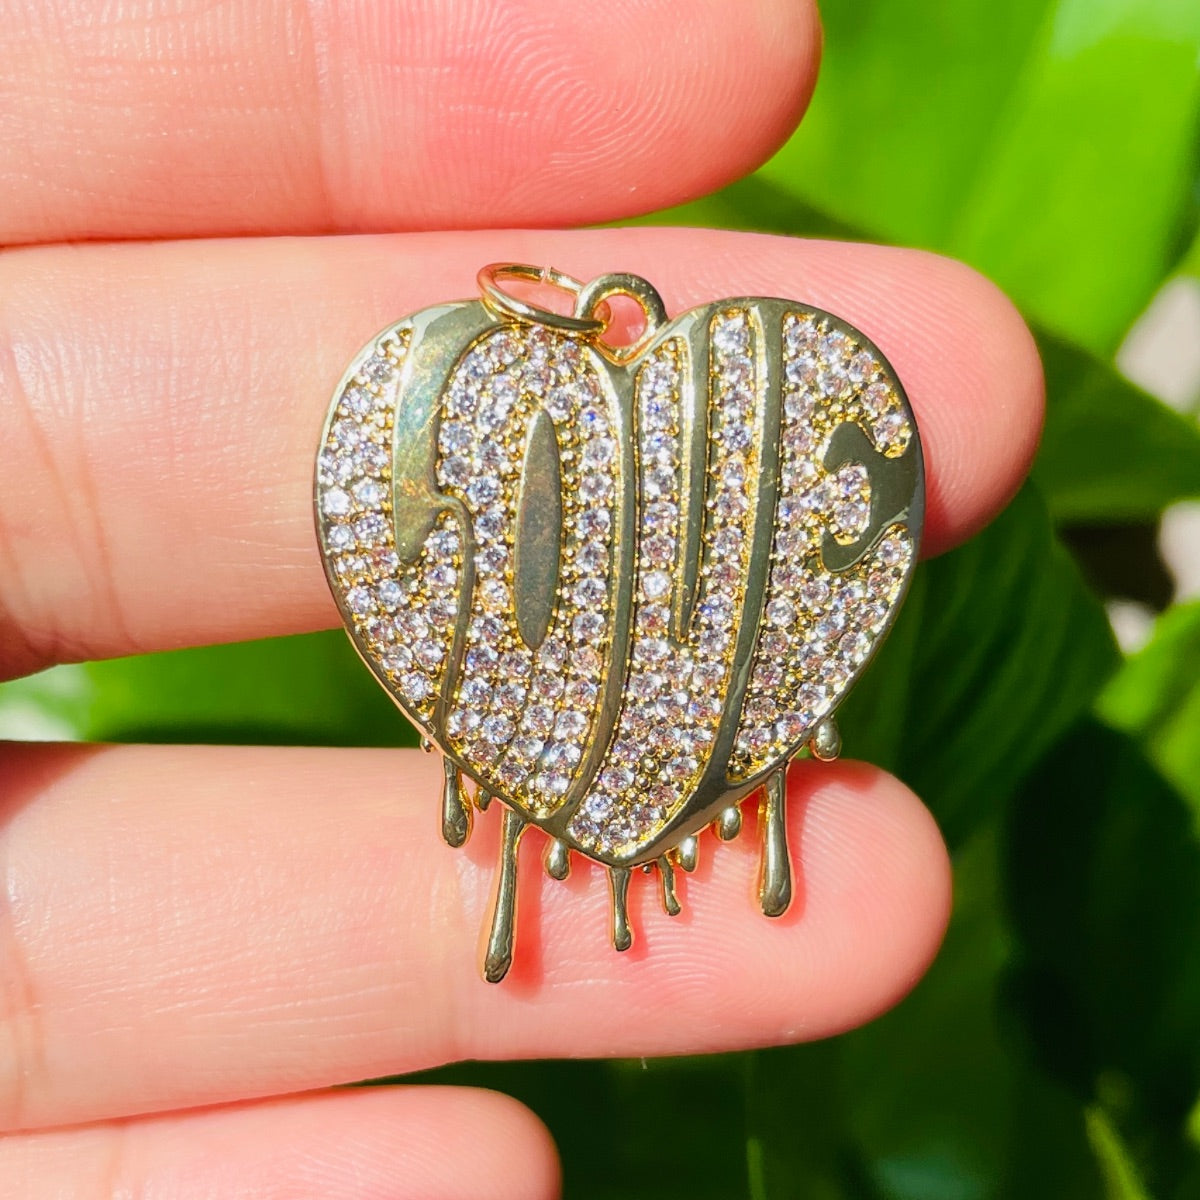 10pcs/lot CZ Paved Dripping Love Heart Charms Gold CZ Paved Charms Hearts Love Letters New Charms Arrivals Charms Beads Beyond